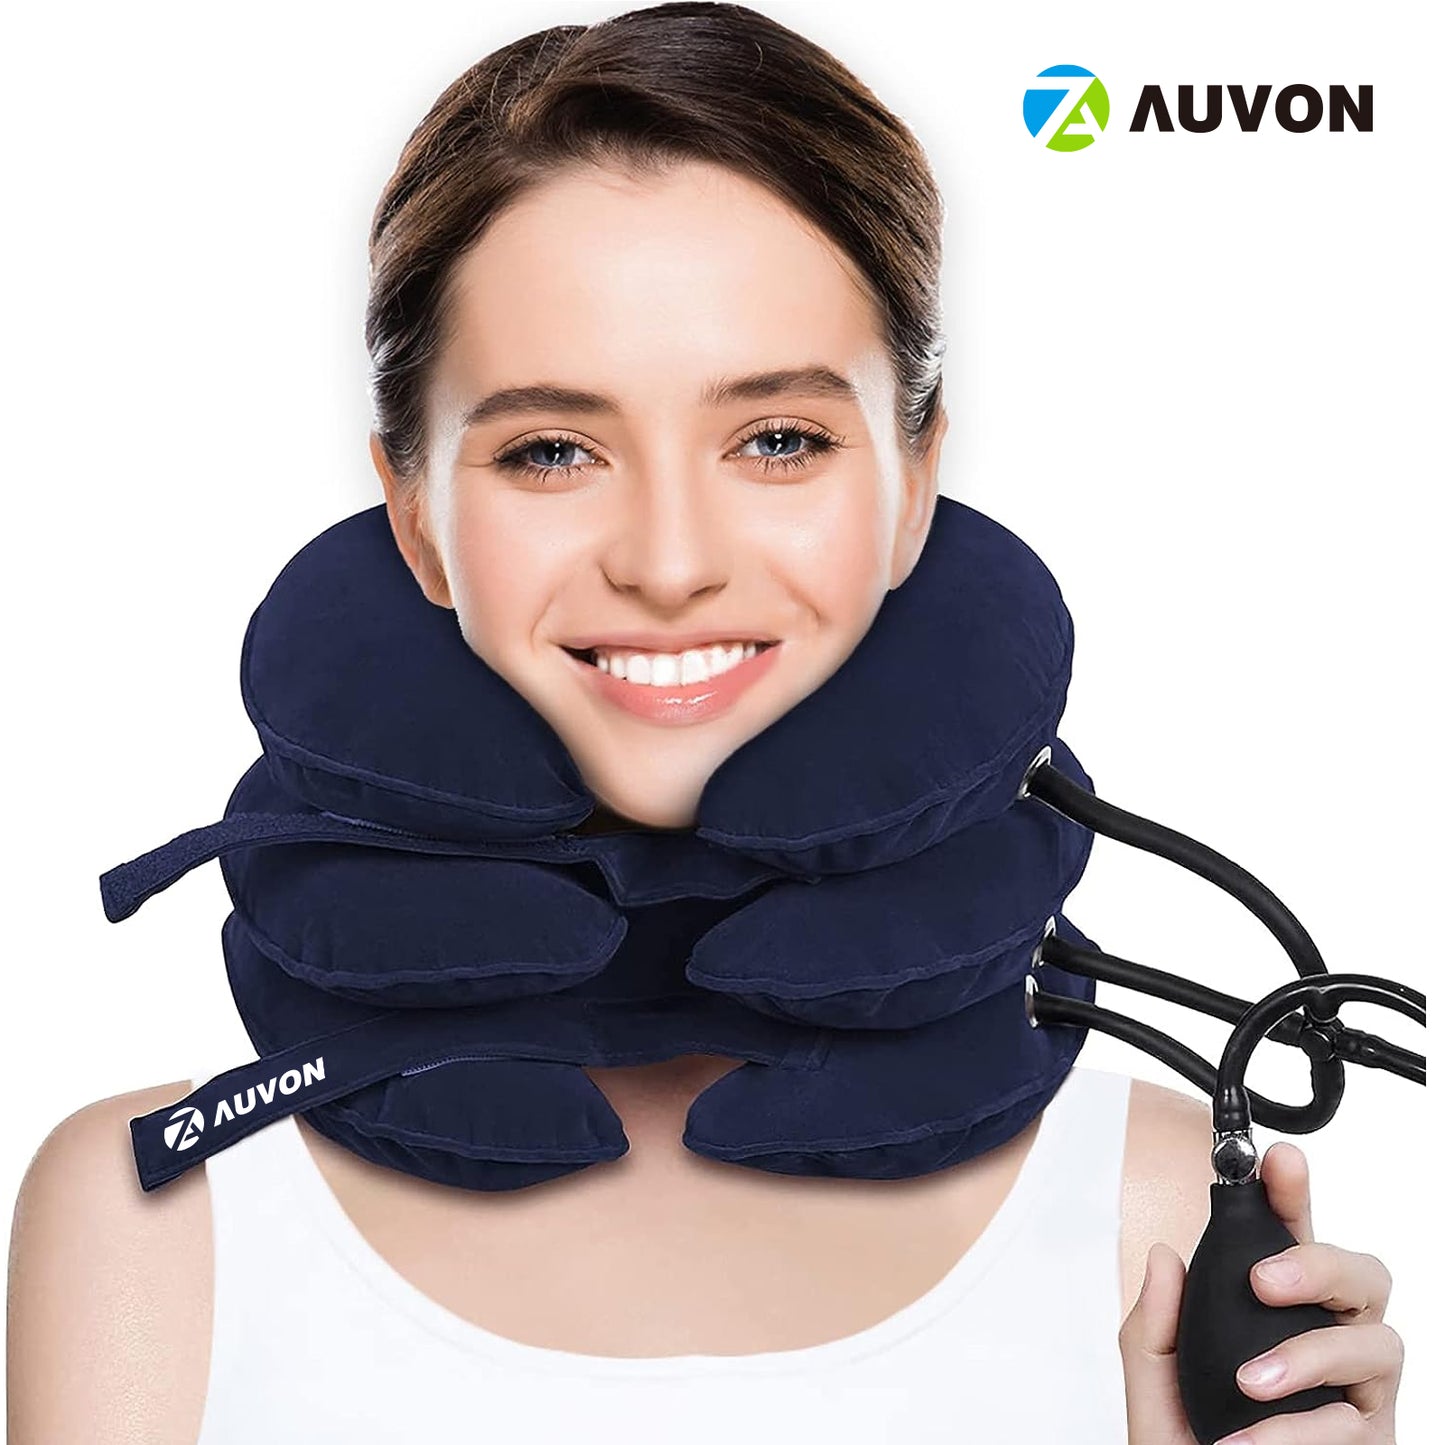 AUVON Inflatable Neck Support Cushions for Neck Pain Relief, Adjustable Inflatable Neck Stretcher Neck Brace, Neck Traction Pillow for Use Neck Decompression and Neck Tension Relief (Blue)